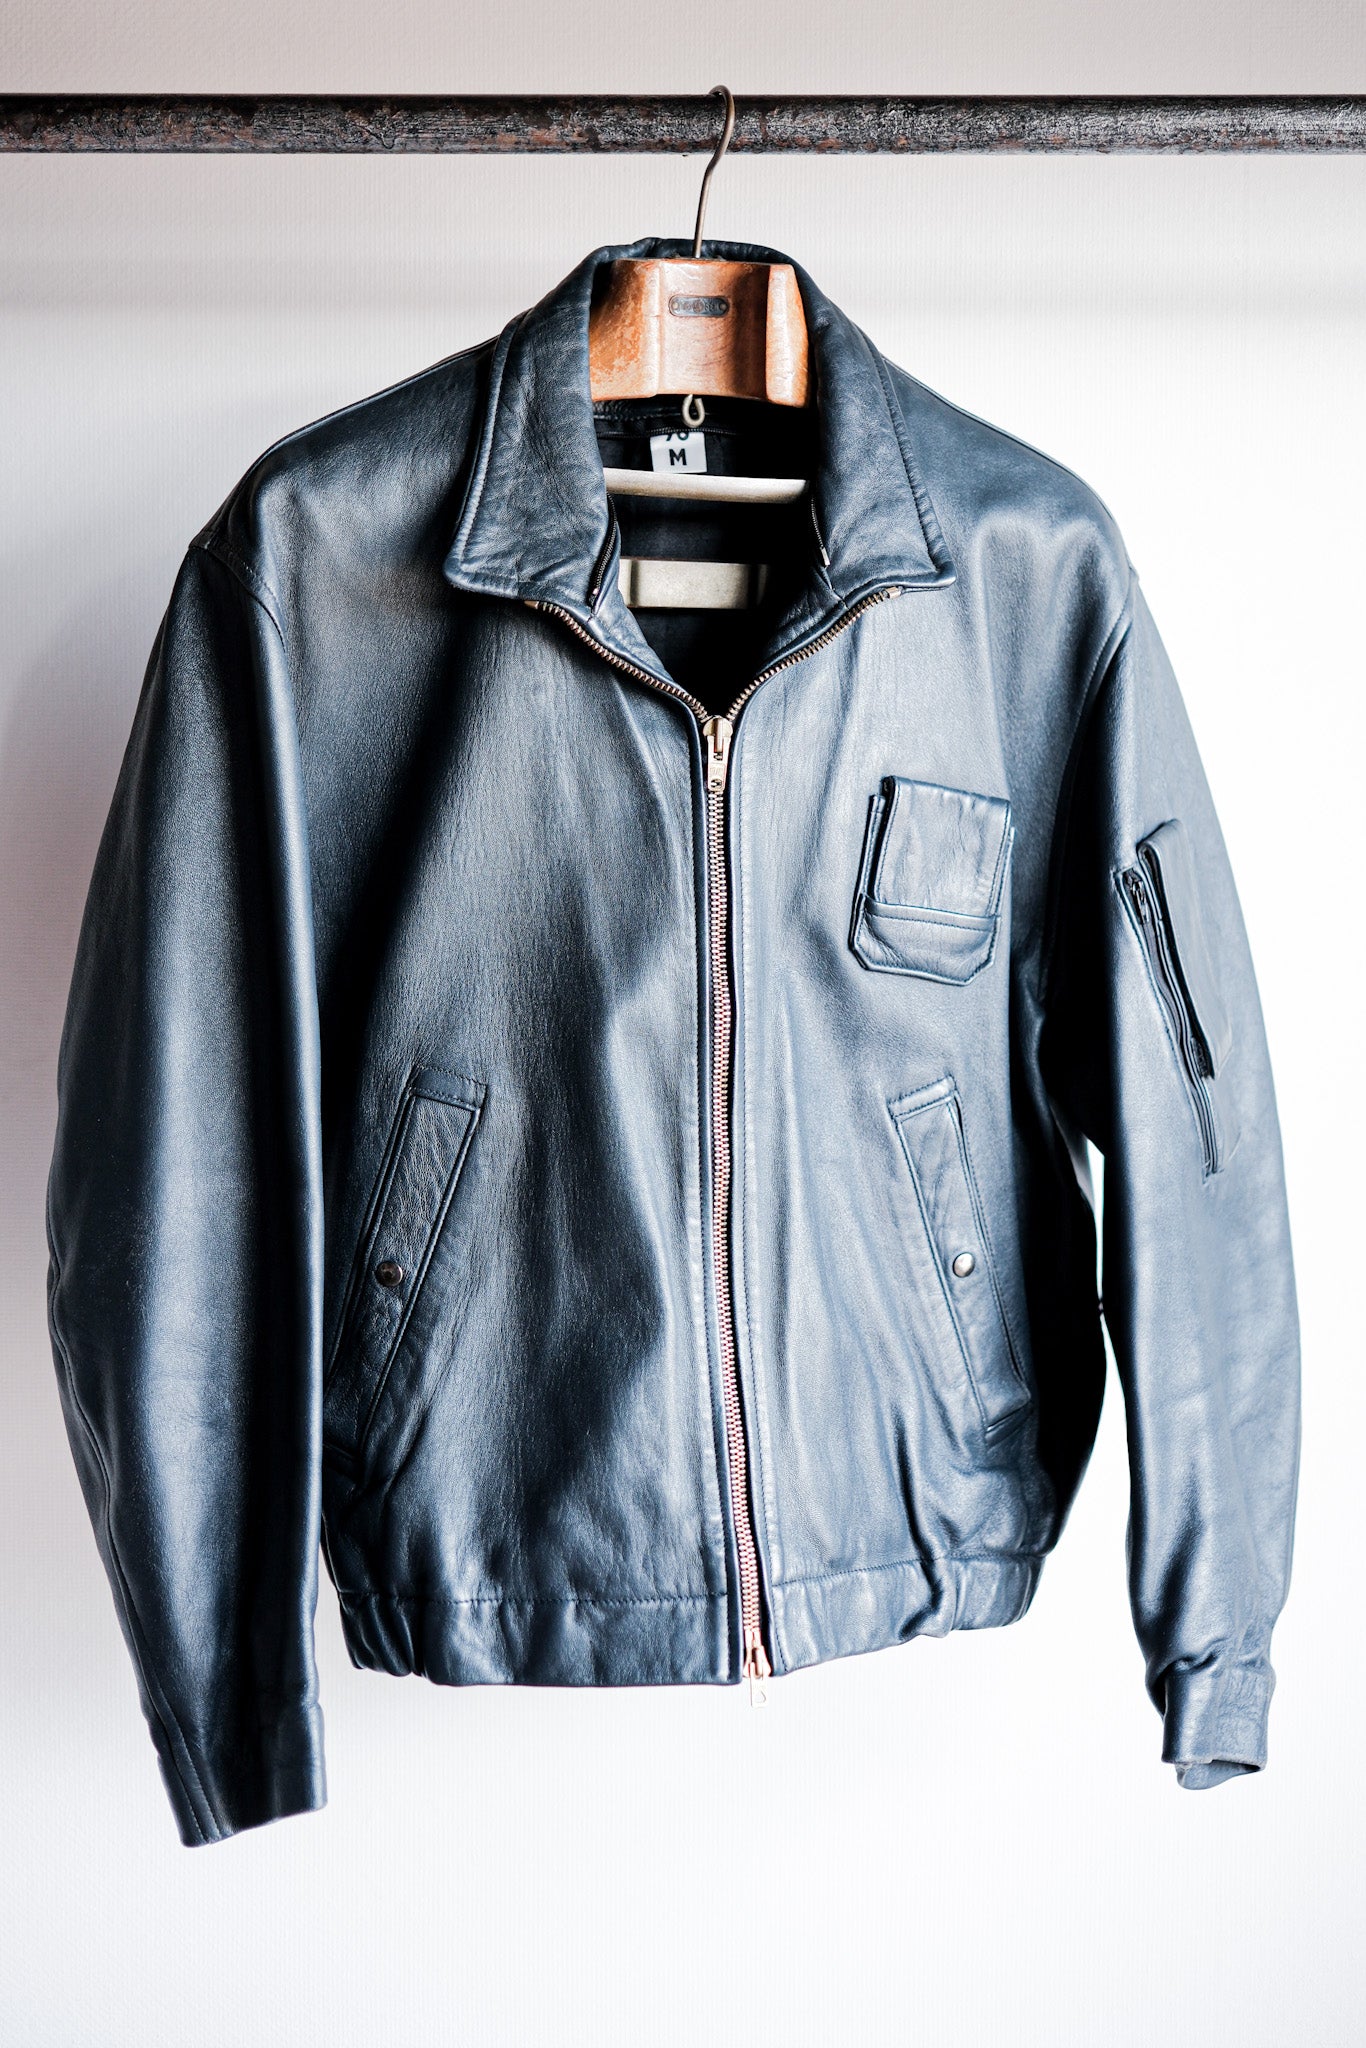 [~ 70's] French Air Force Pilot Leather Jacket with China Strap Size.96m